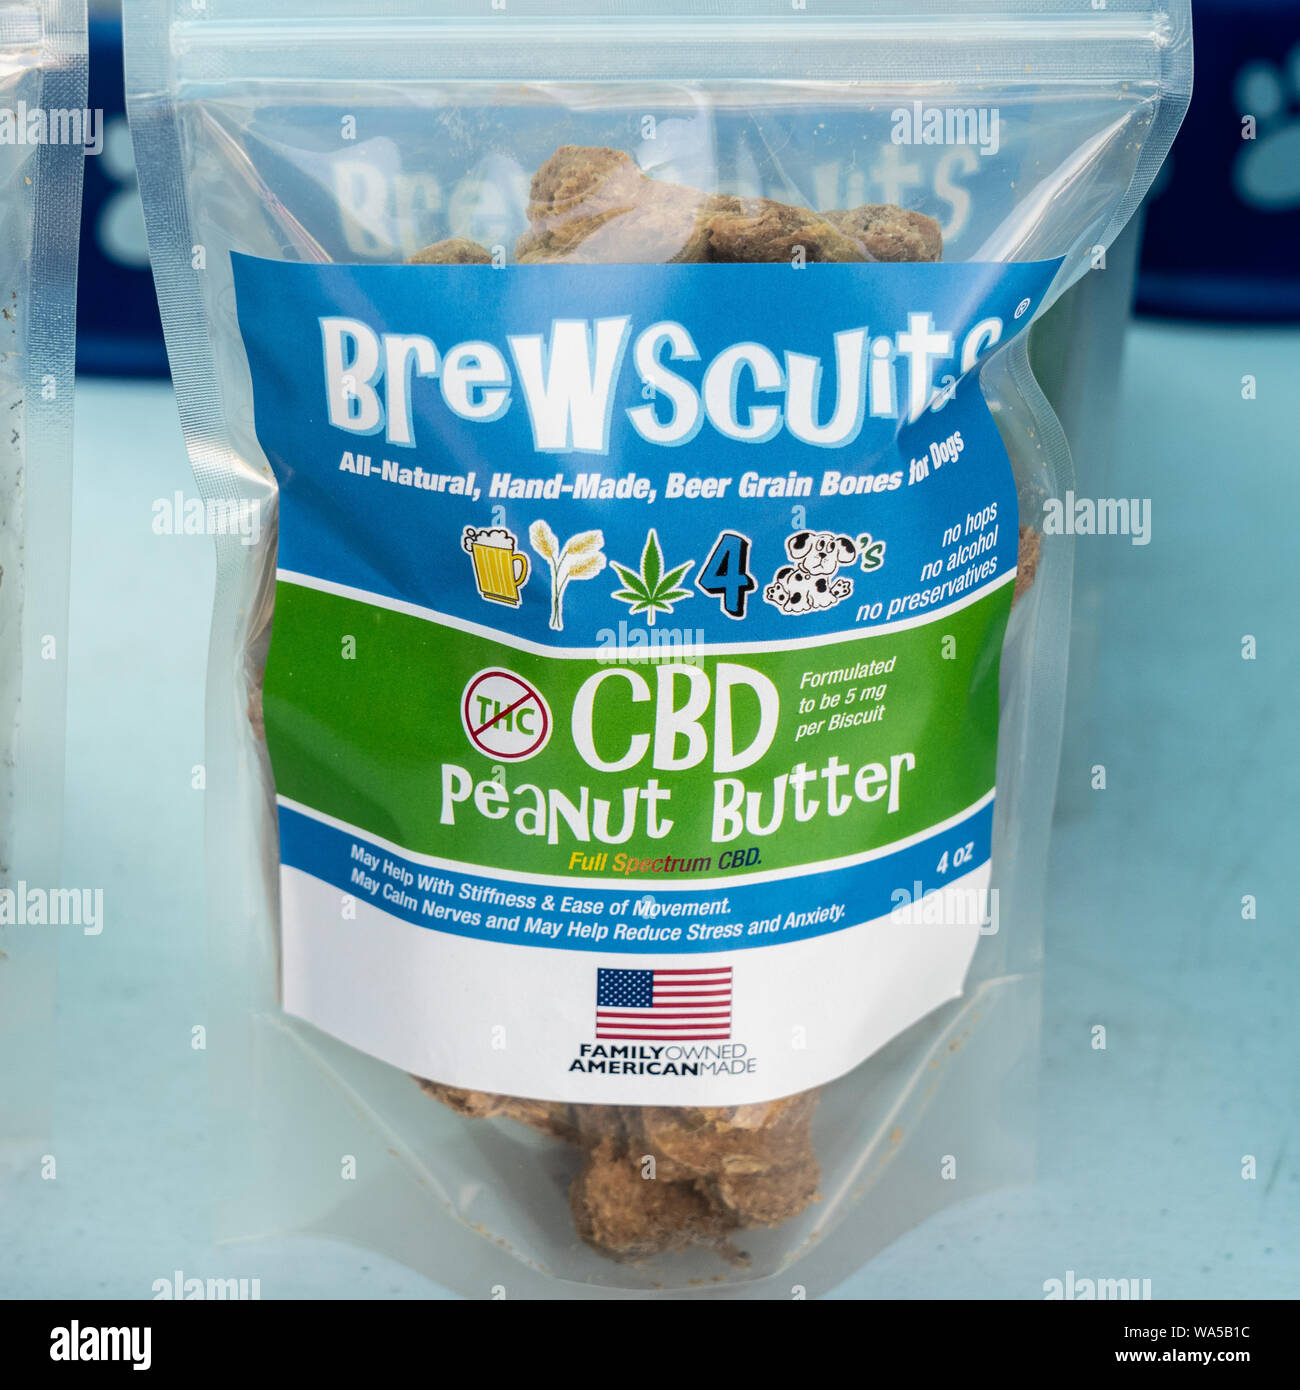 Lansdale, PA - August 10, 2019: Brewscuits CBD formulation with peanut butter flavor is an all natural dog buiscuit treat made from beer grain. Stock Photo